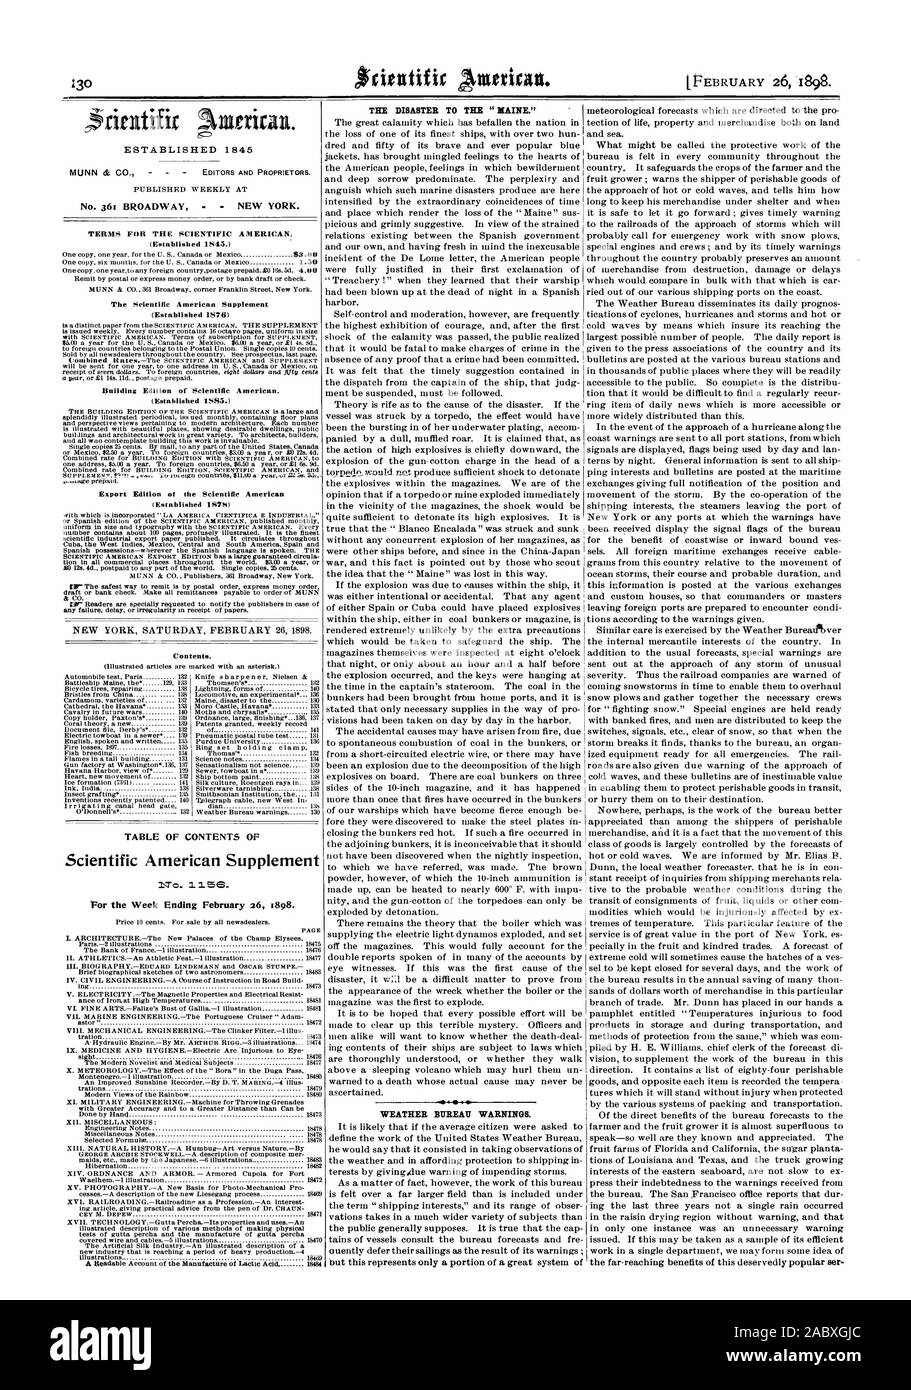 No. 361 BROADWAY  NEW YORK. Contents. Scientific American Supplement For the Week Ending February 26 1898. PAGE THE DISASTER TO THE 'MAINE.' WEATHER BUREAU WARNINGS., 1898-02-26 Stock Photo